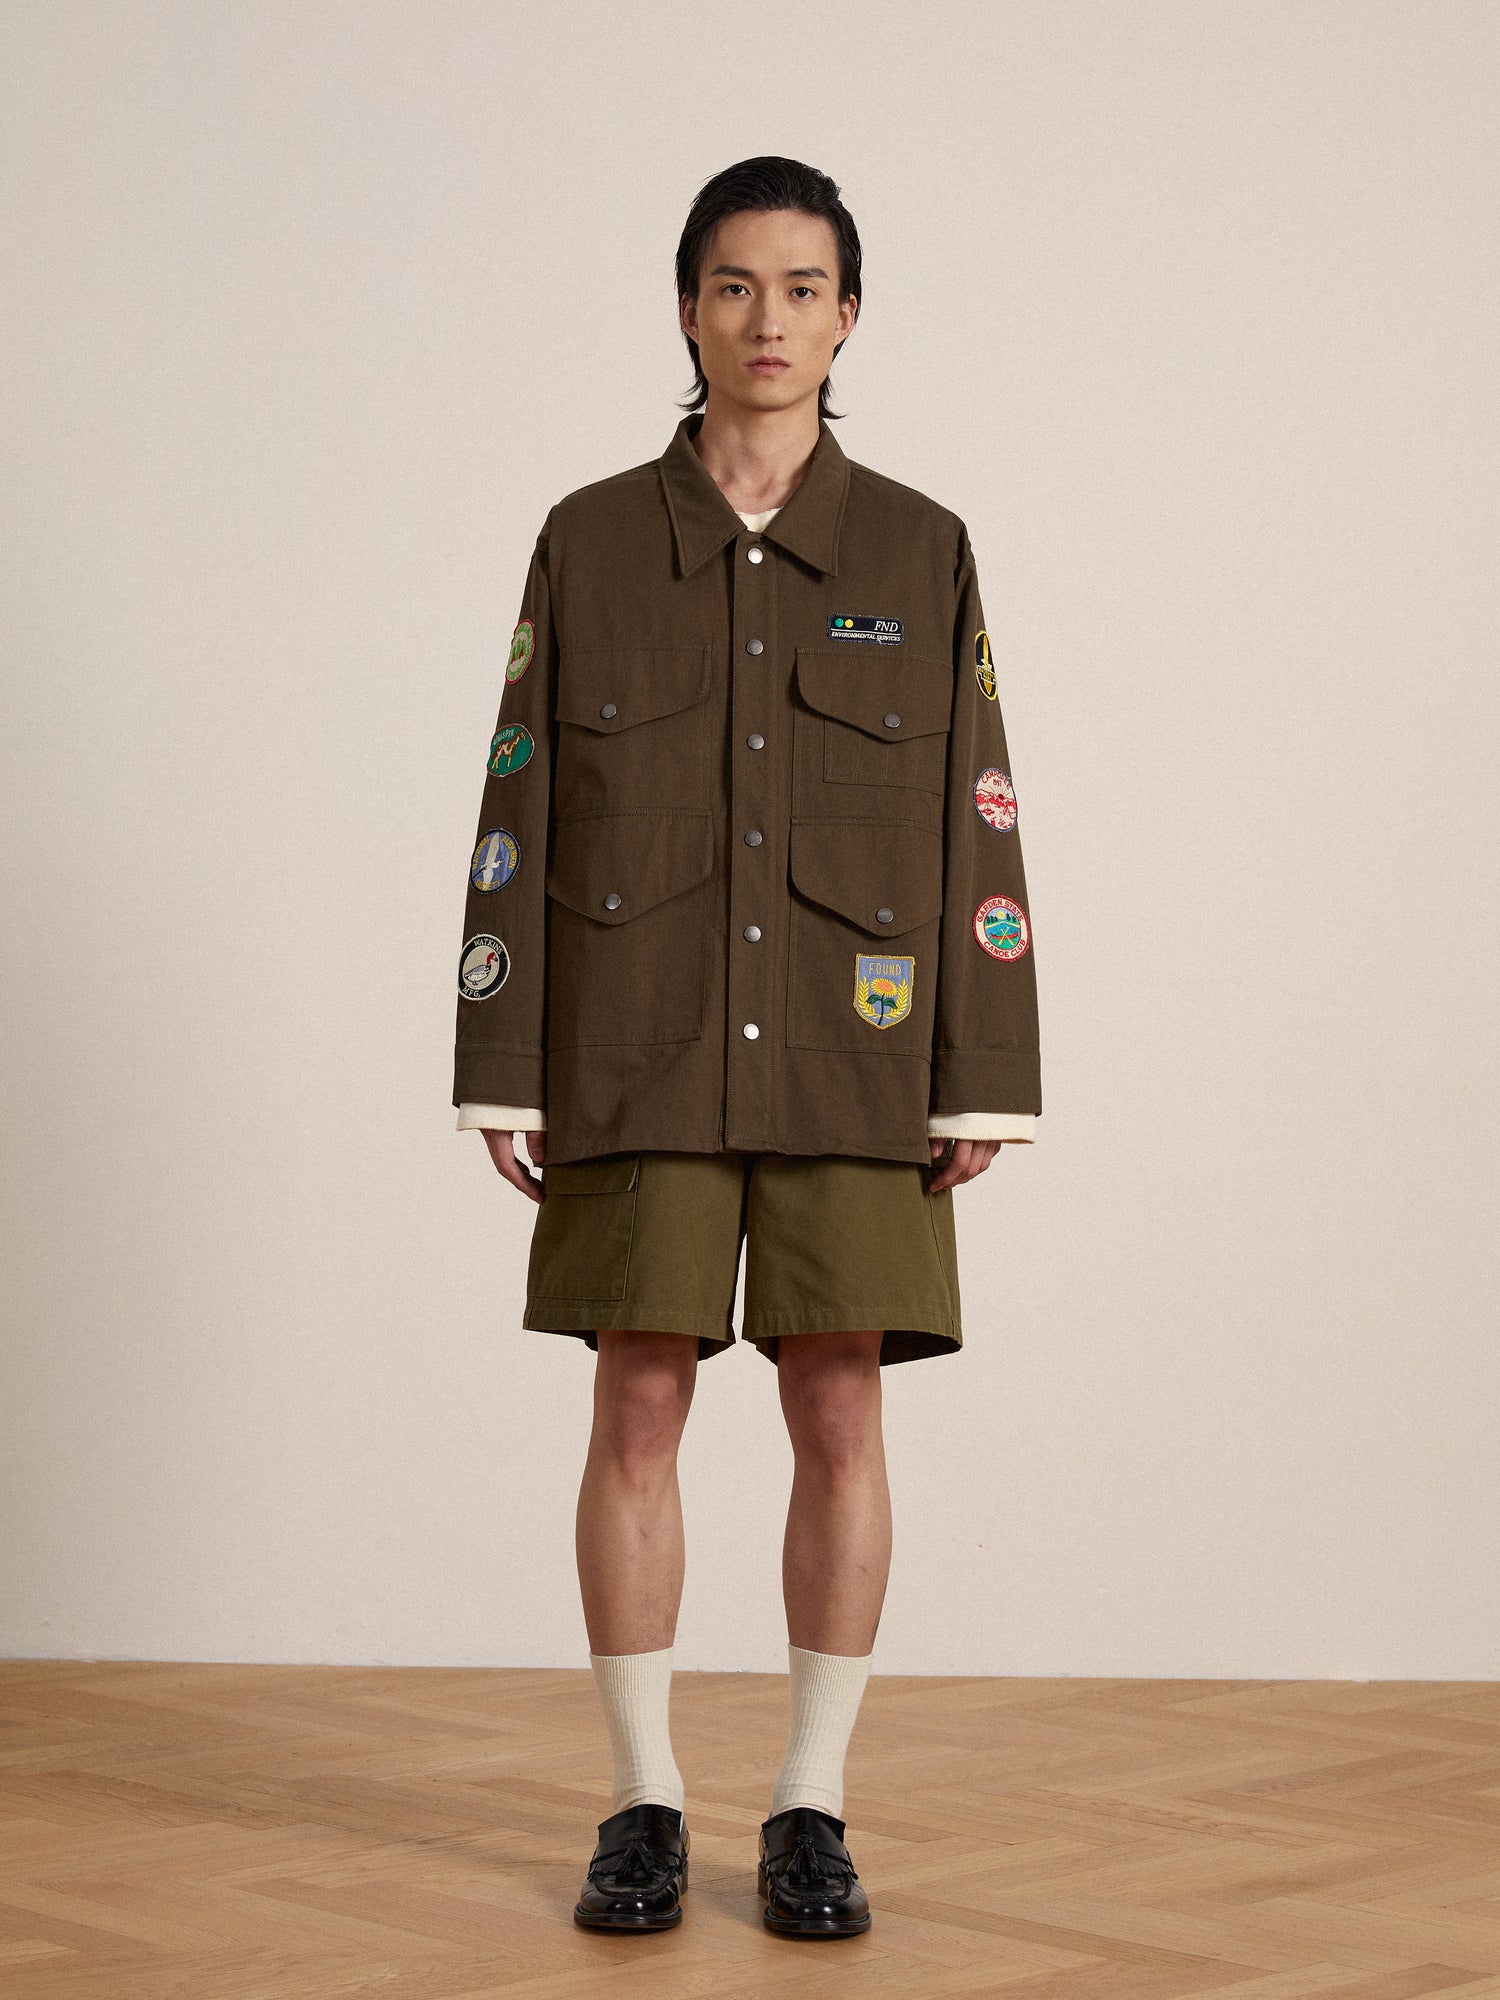 A man in a Found Ports Park Multi Patch Work Jacket and shorts standing on a wooden floor.